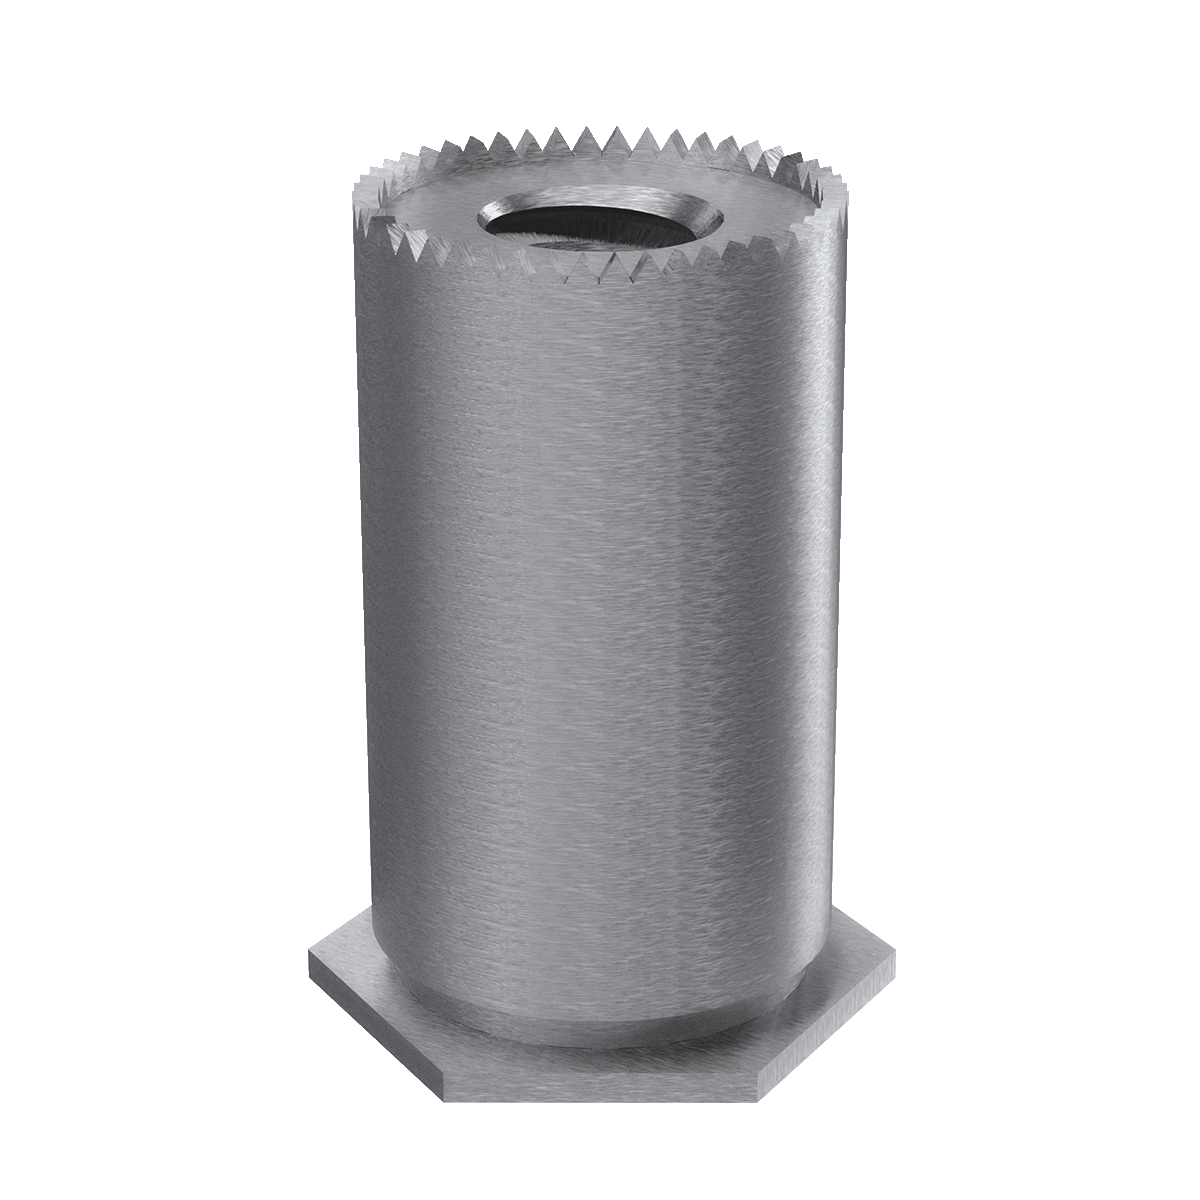 Self-Clinching Standoff, Self-Grounding, 300 Series Stainless Steel, Passivated, M3x0.5 x 4, 100 Pack